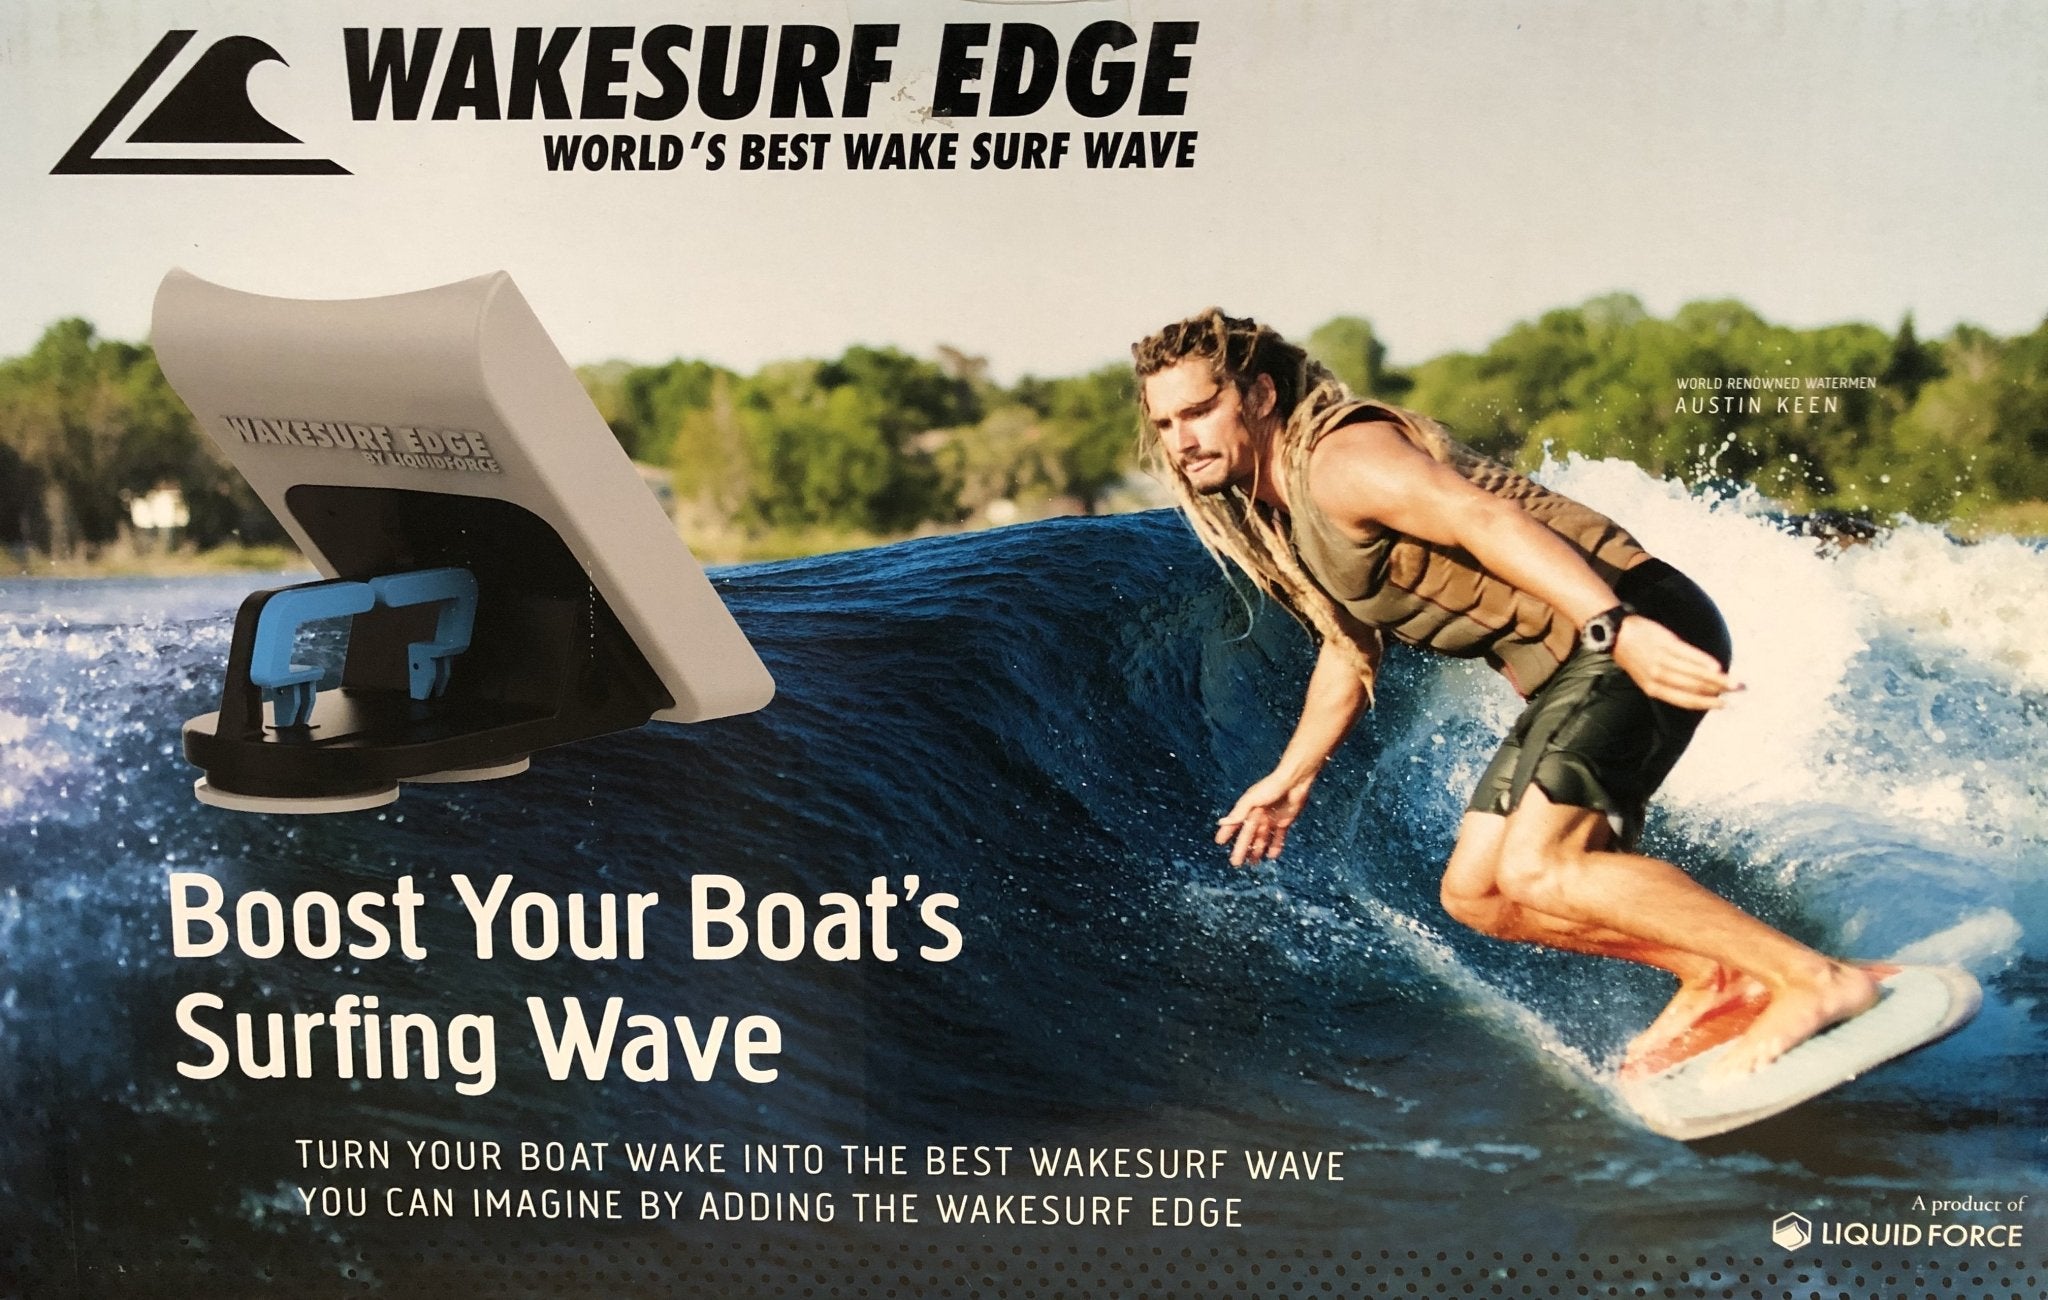 How-To: 360 on a Wakesurf Board – WakeMAKERS